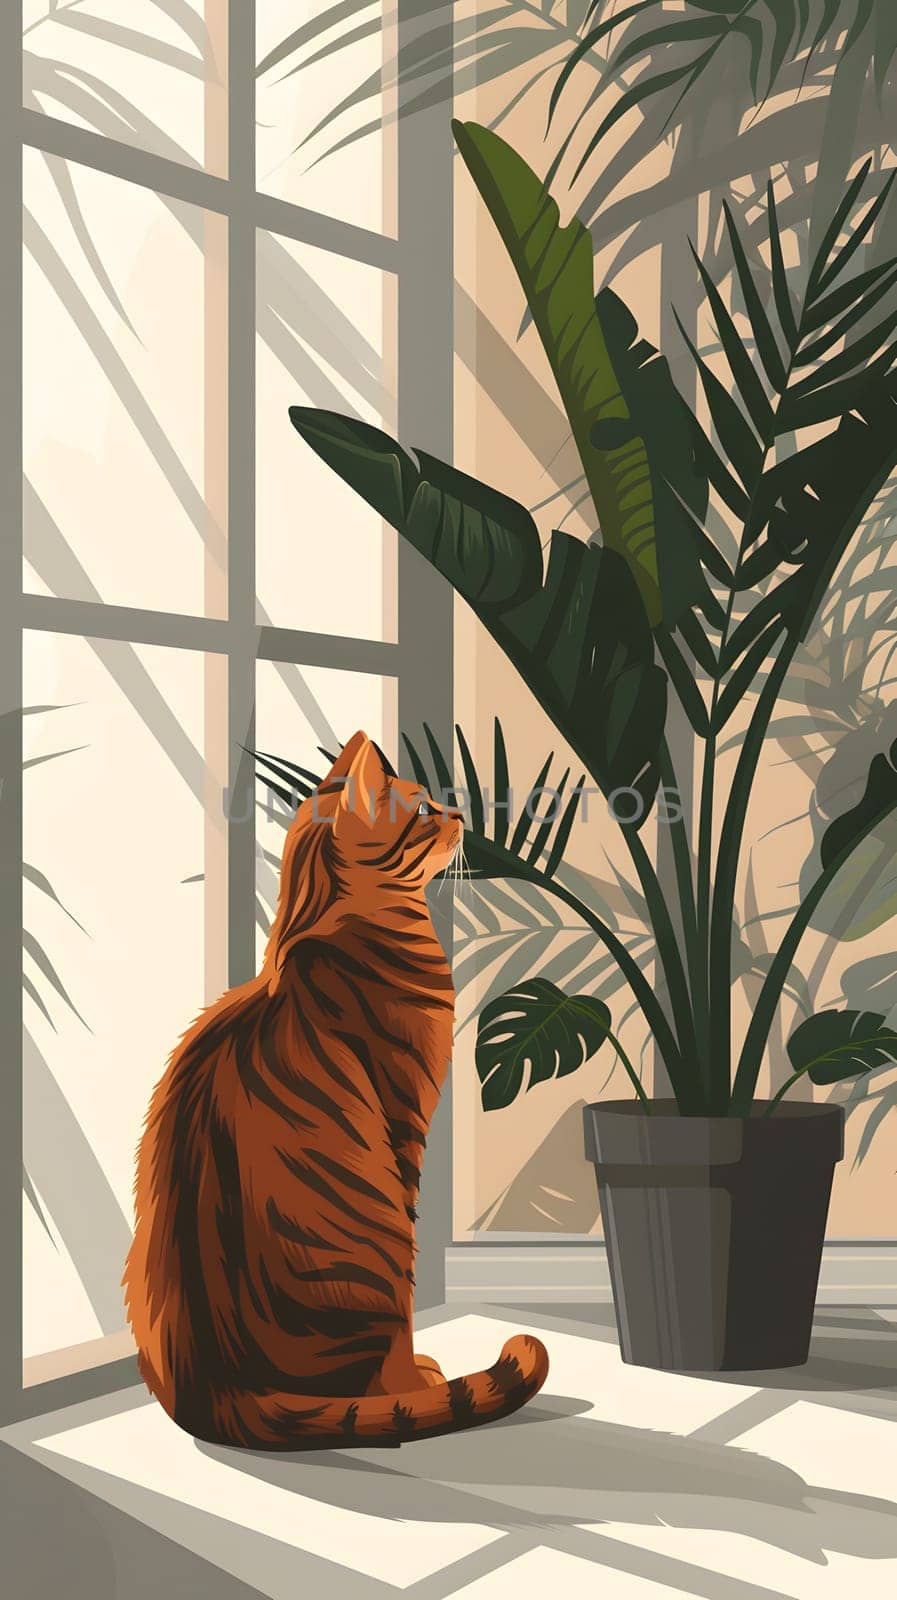 A Felidae carnivore, the cat is perched on a window sill beside a houseplant in a flowerpot. Its whiskers twitch as it gazes outside